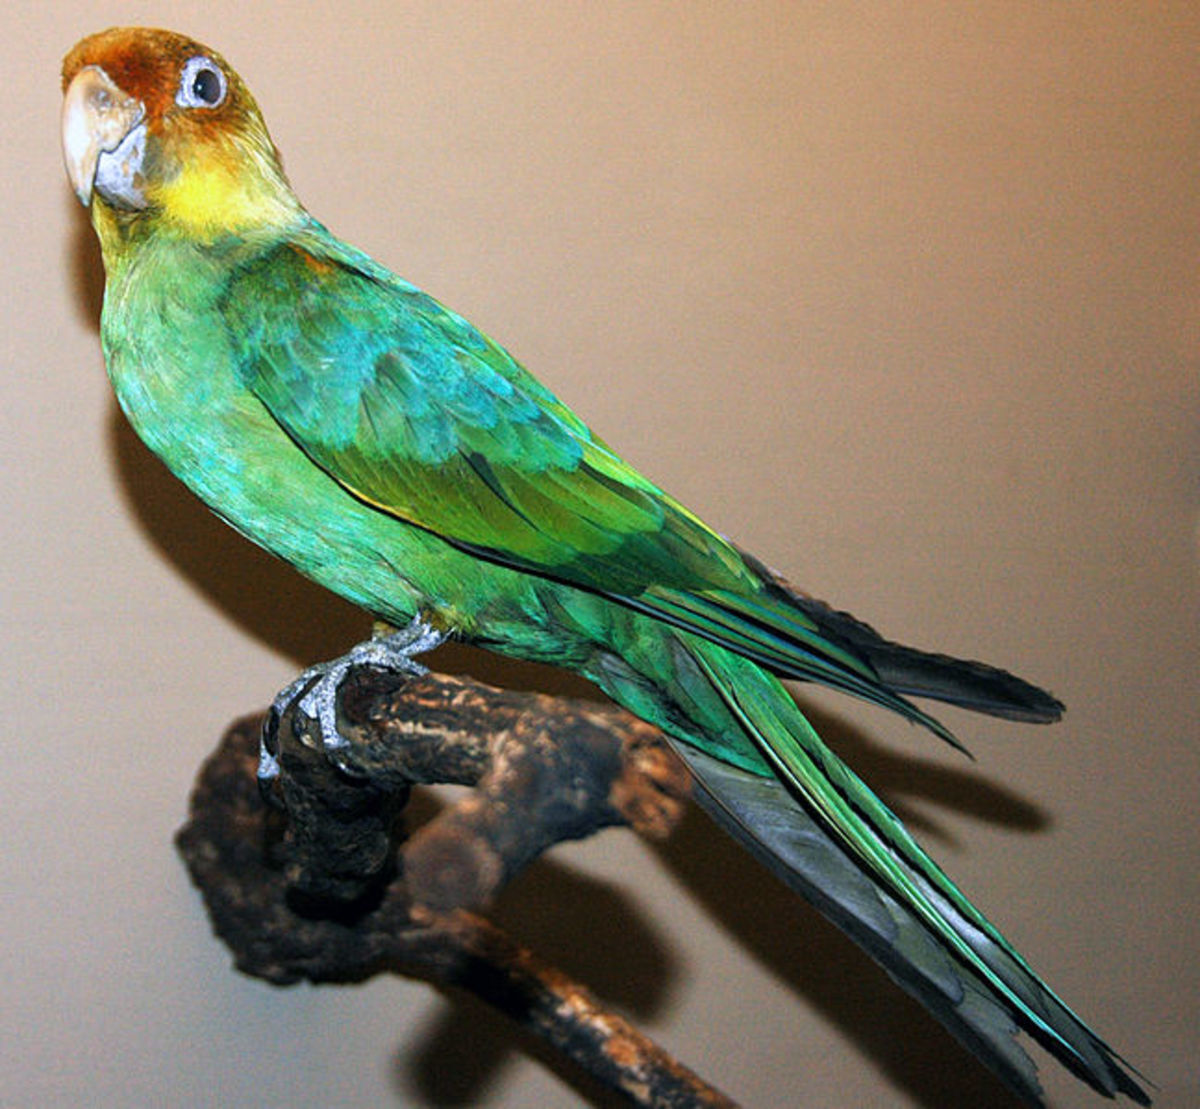 A mounted Carolina parakeet on display at the Field Museum of Natural History, Chicago, Illinois.